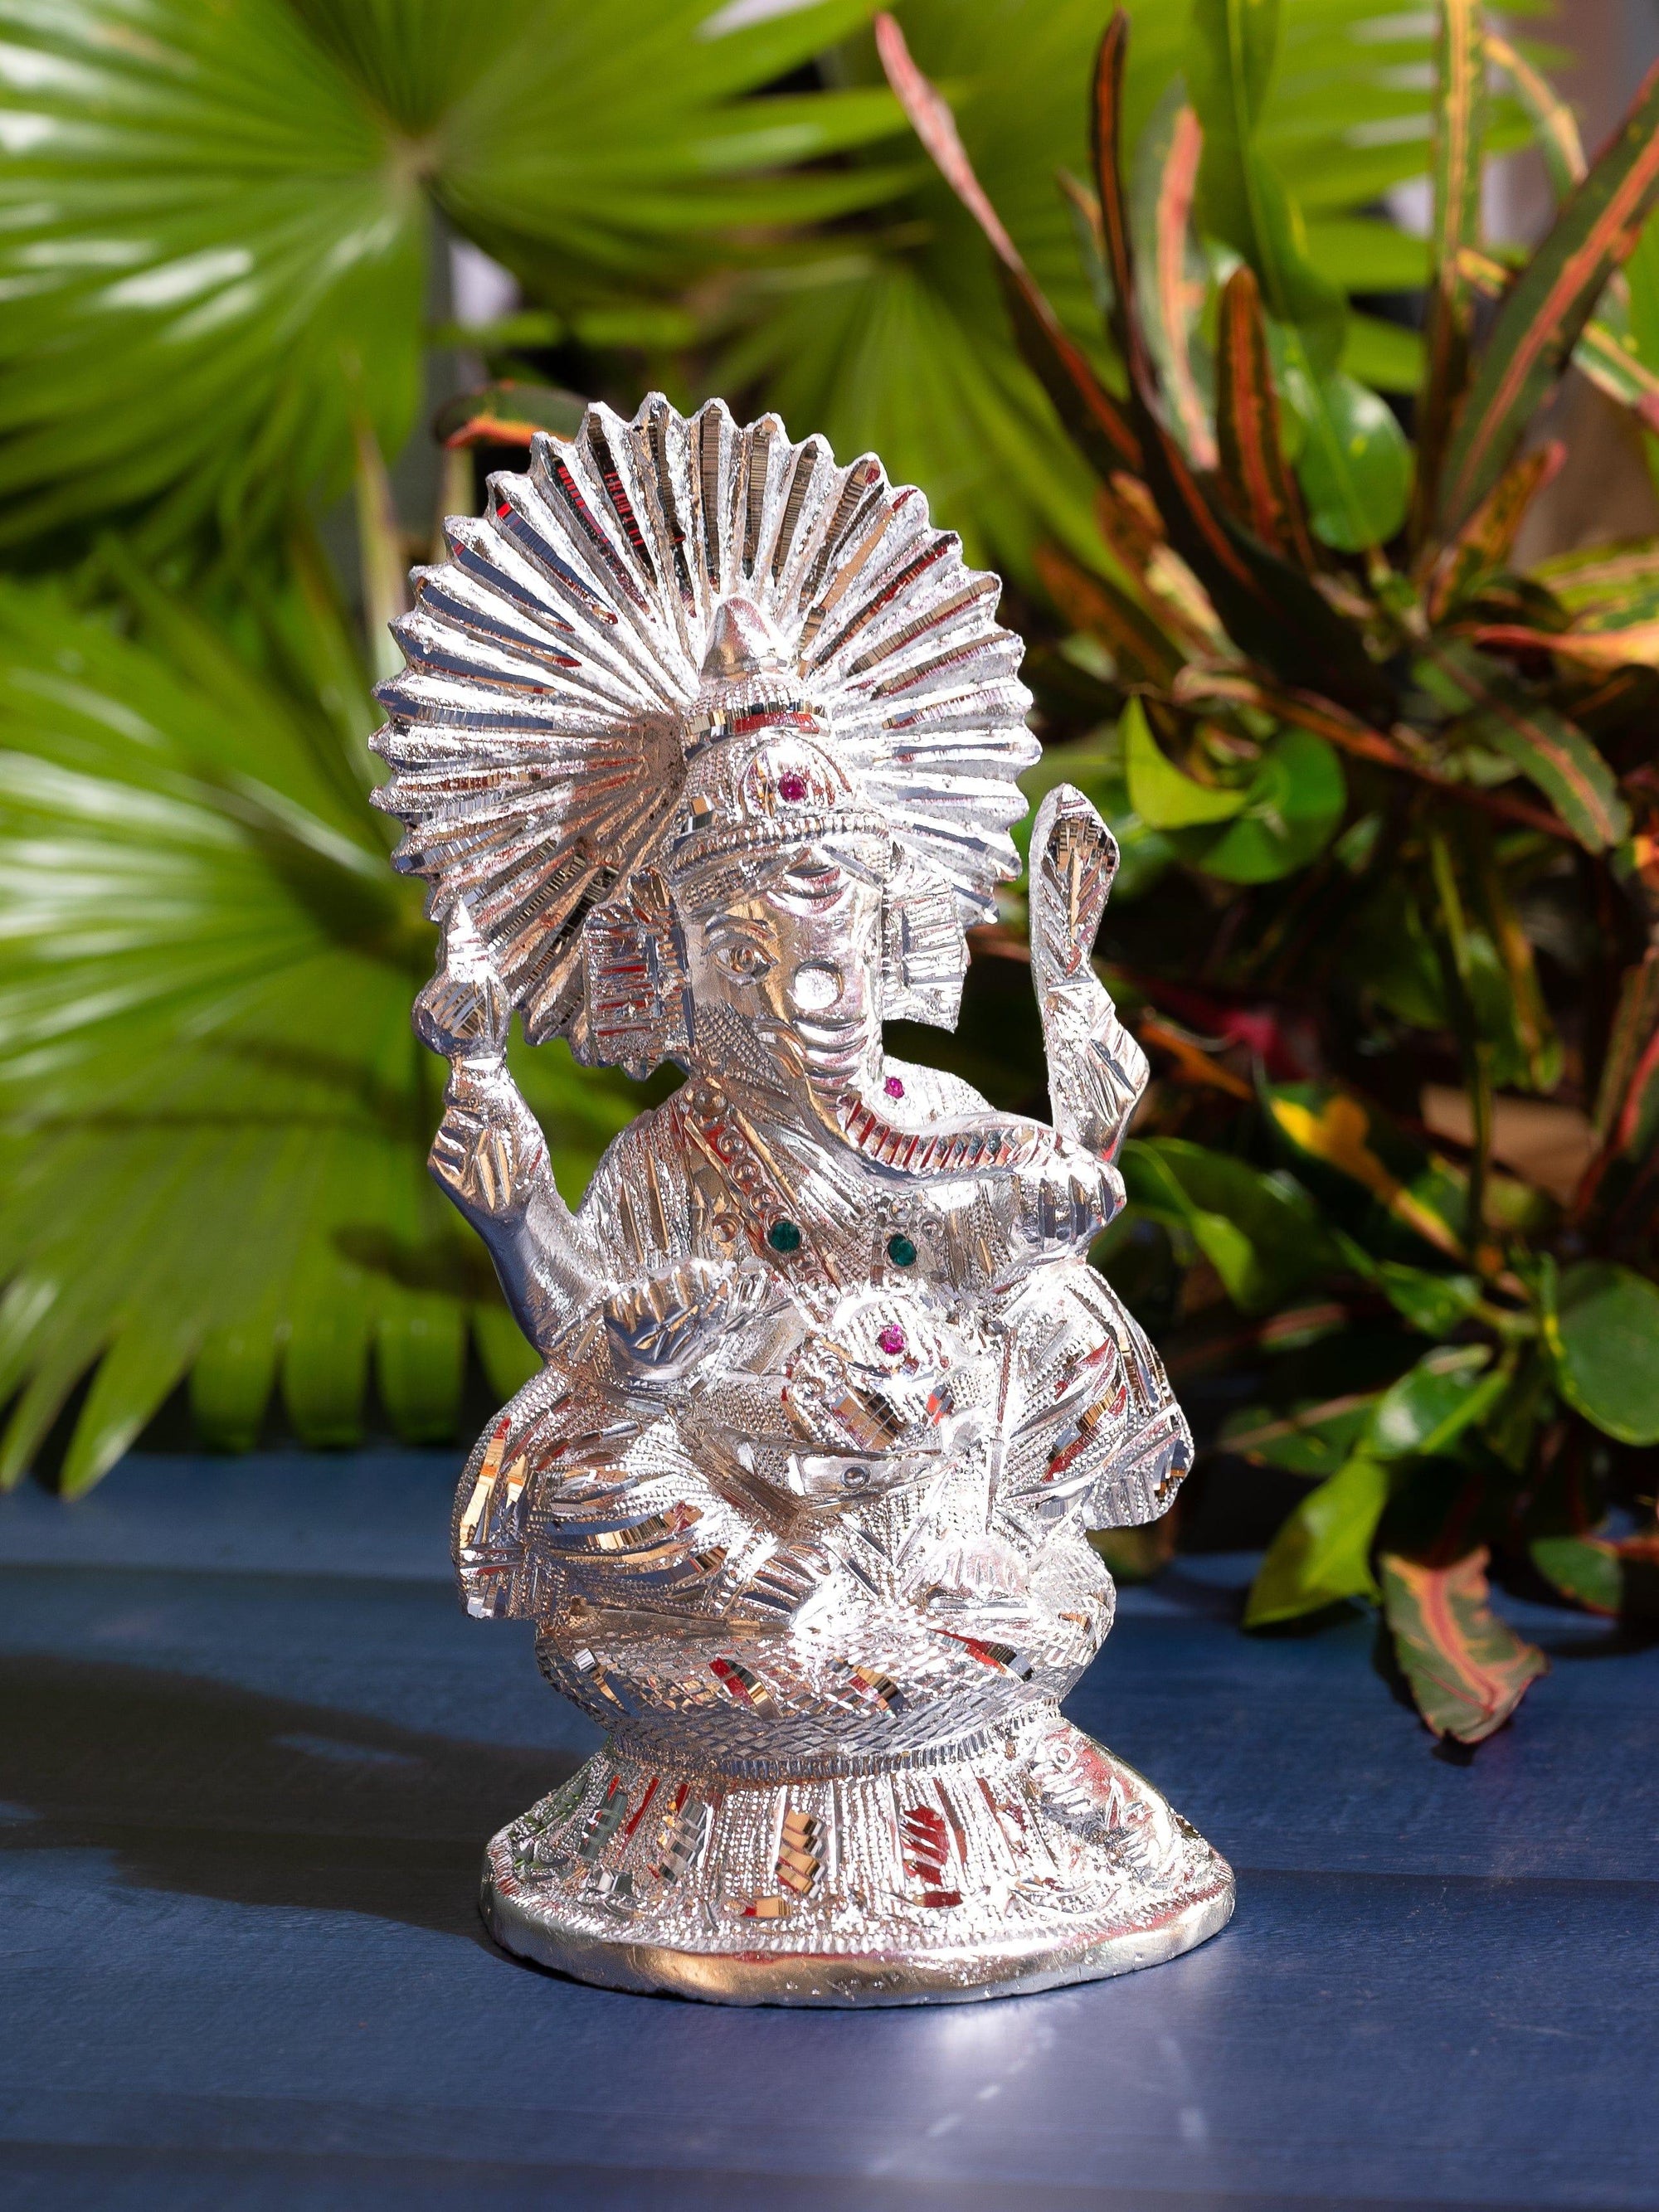 Zinc Metal Handcrafted Lord Ganesha Statue - 8 inches height - The Heritage Artifacts